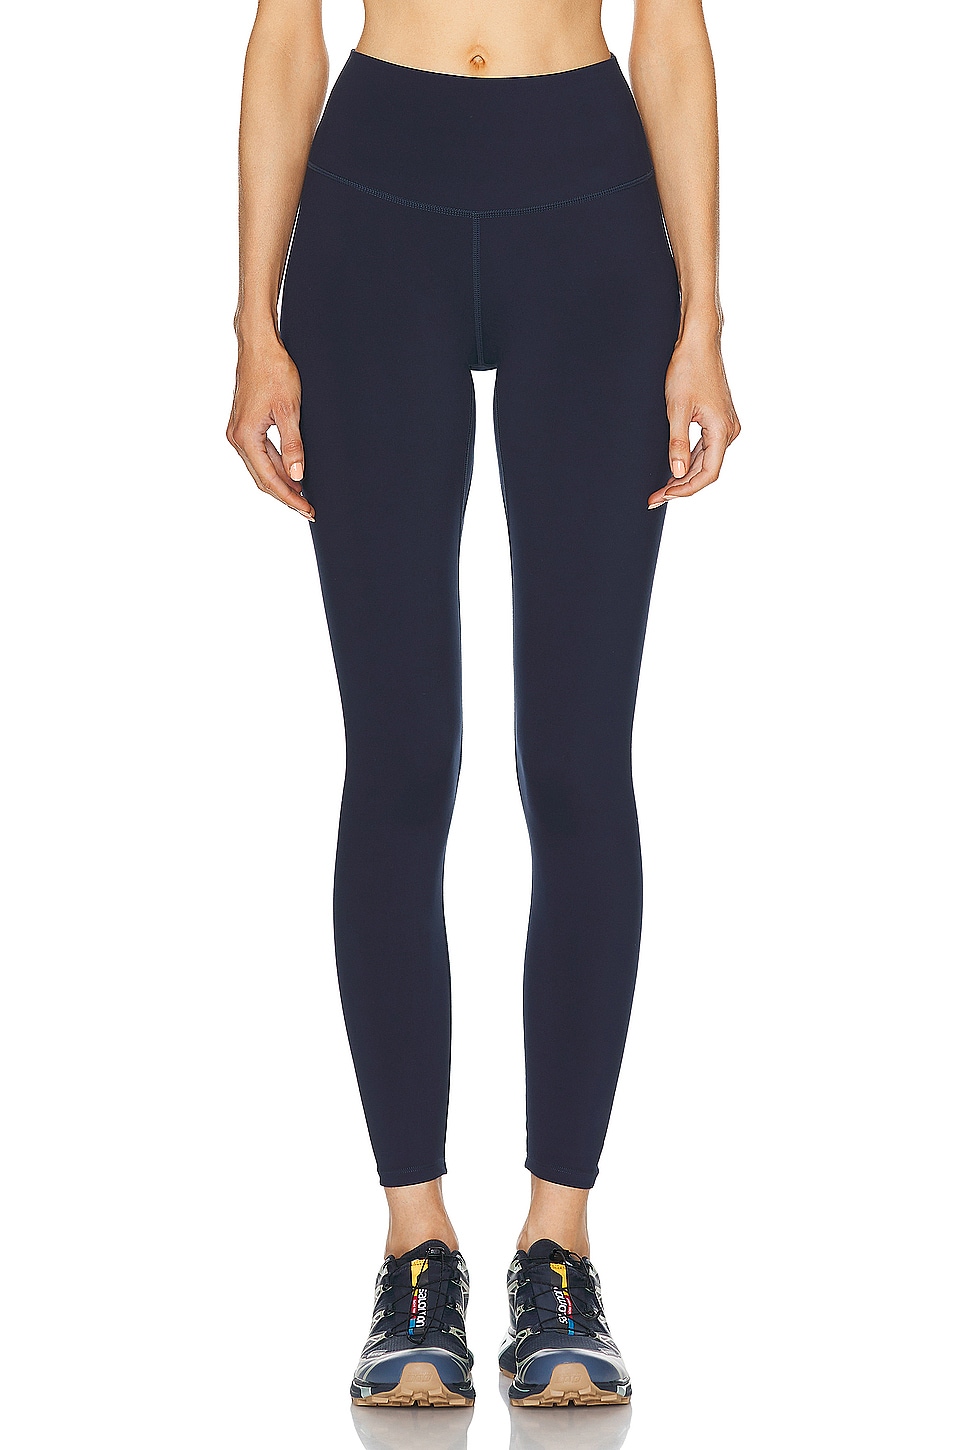 Image 1 of Varley Free Soft High Rise 25 Legging in Sky Captain